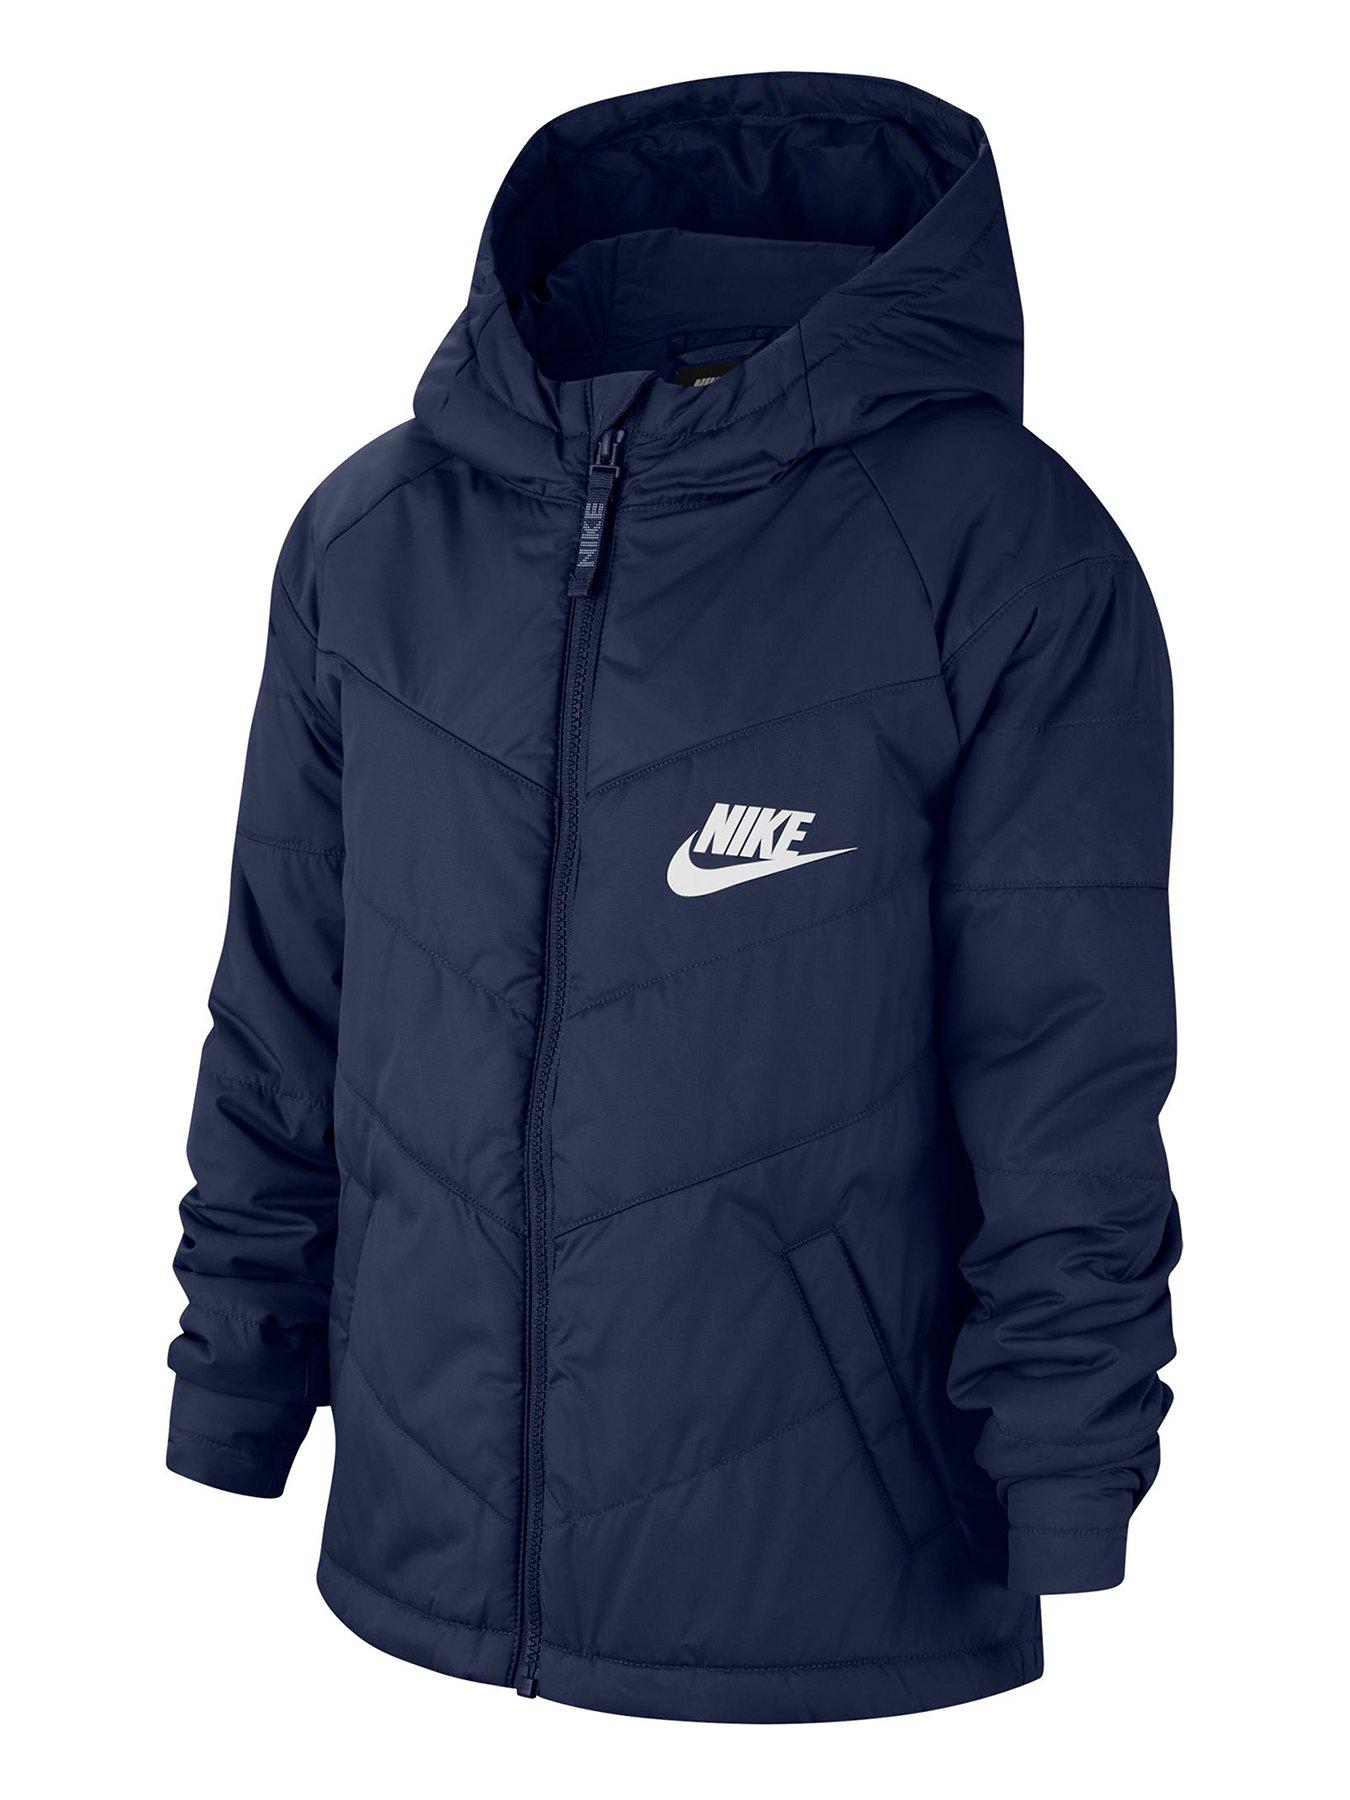 where to get cheap nike clothes